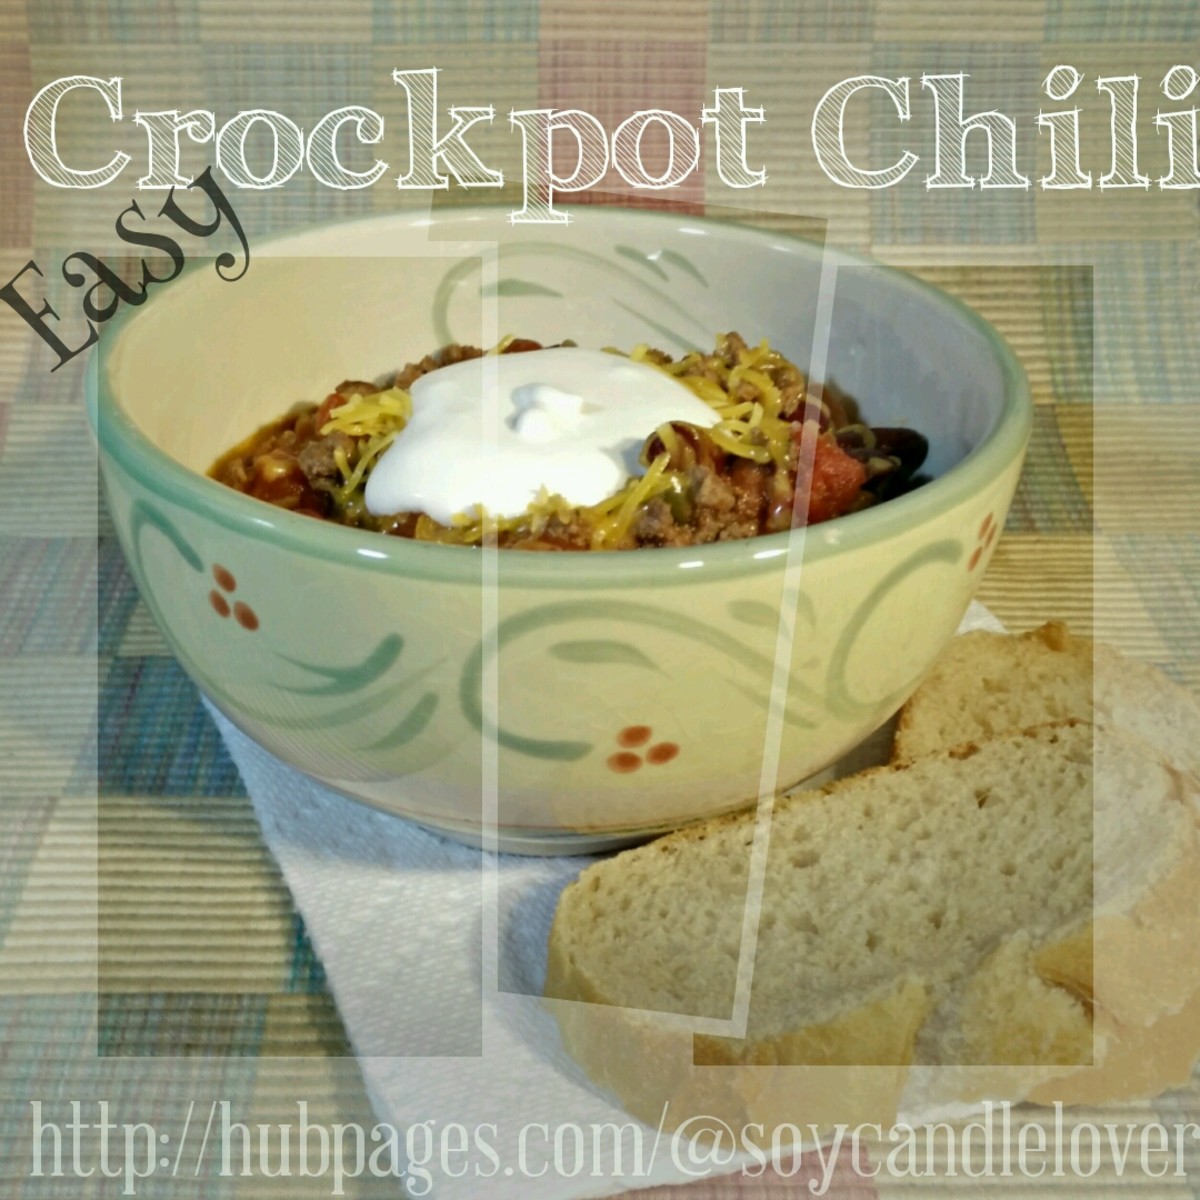 Serving suggestion:  A couple slices of crusty italian bread and a side salad make a complete and hearty  meal with this chili recipe.